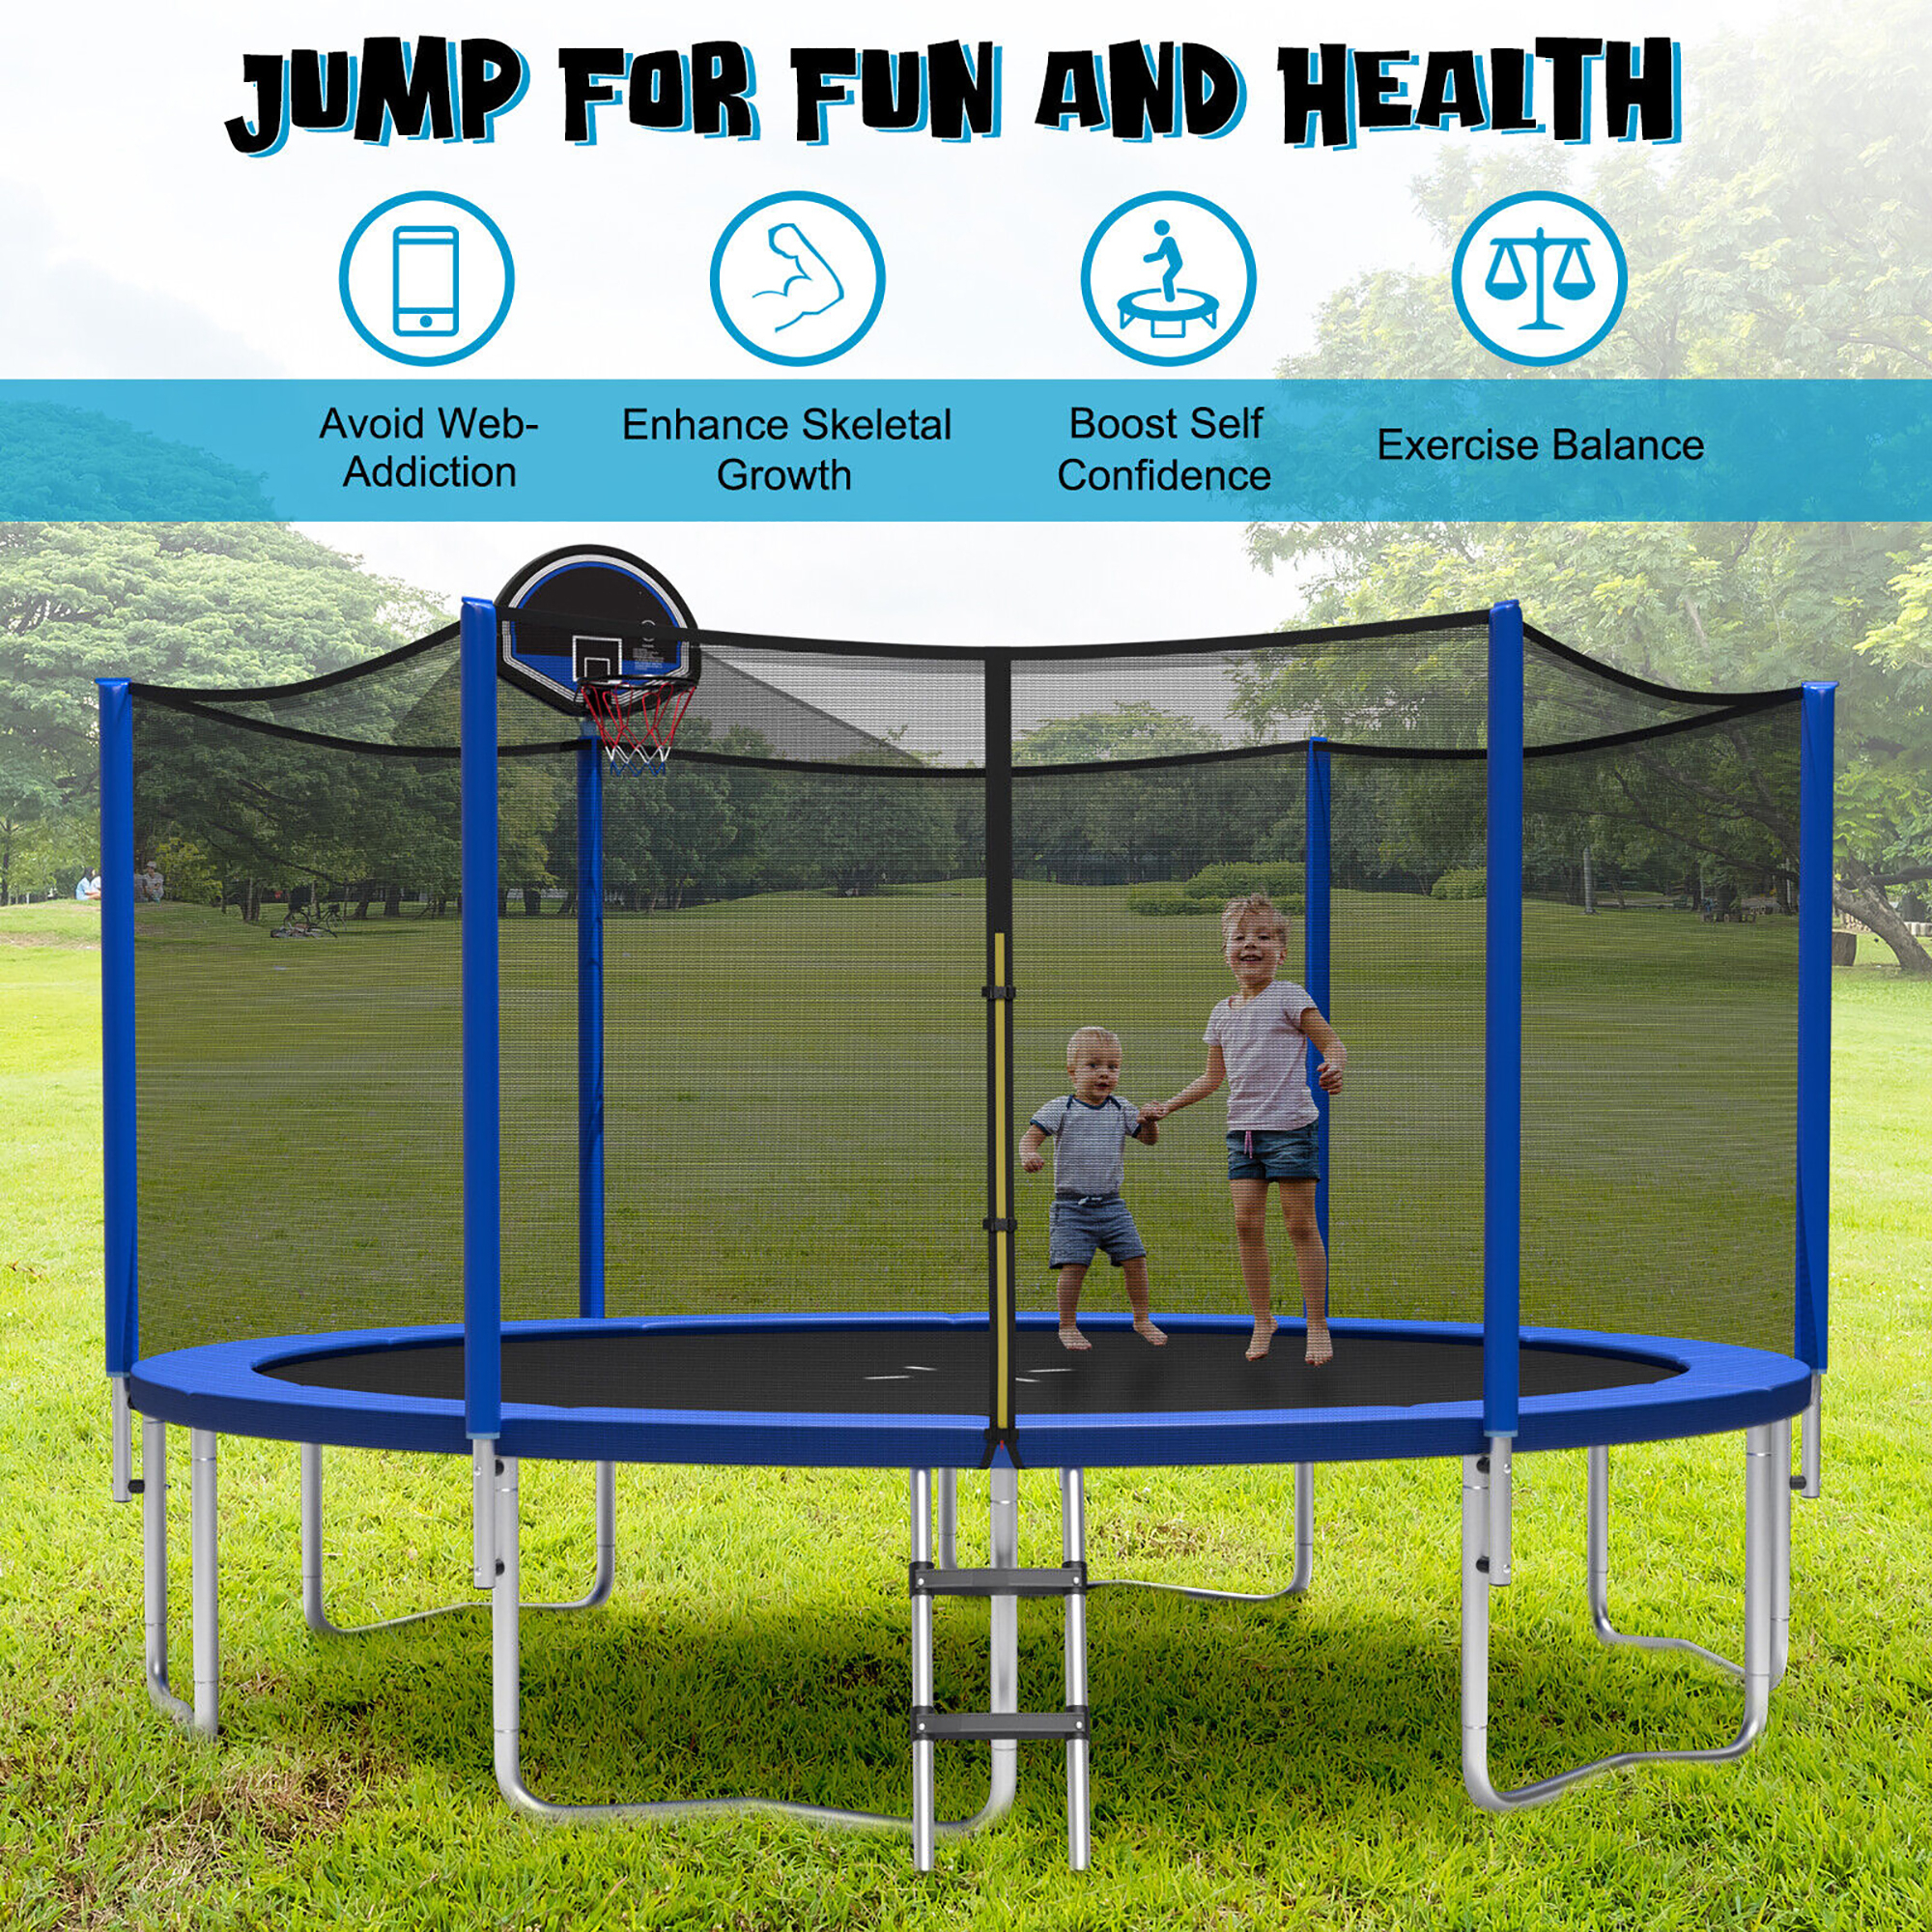 Gymax 15FT Outdoor Large Trampoline Safety Enclosure Net w/ Basketball Hoop Ladder